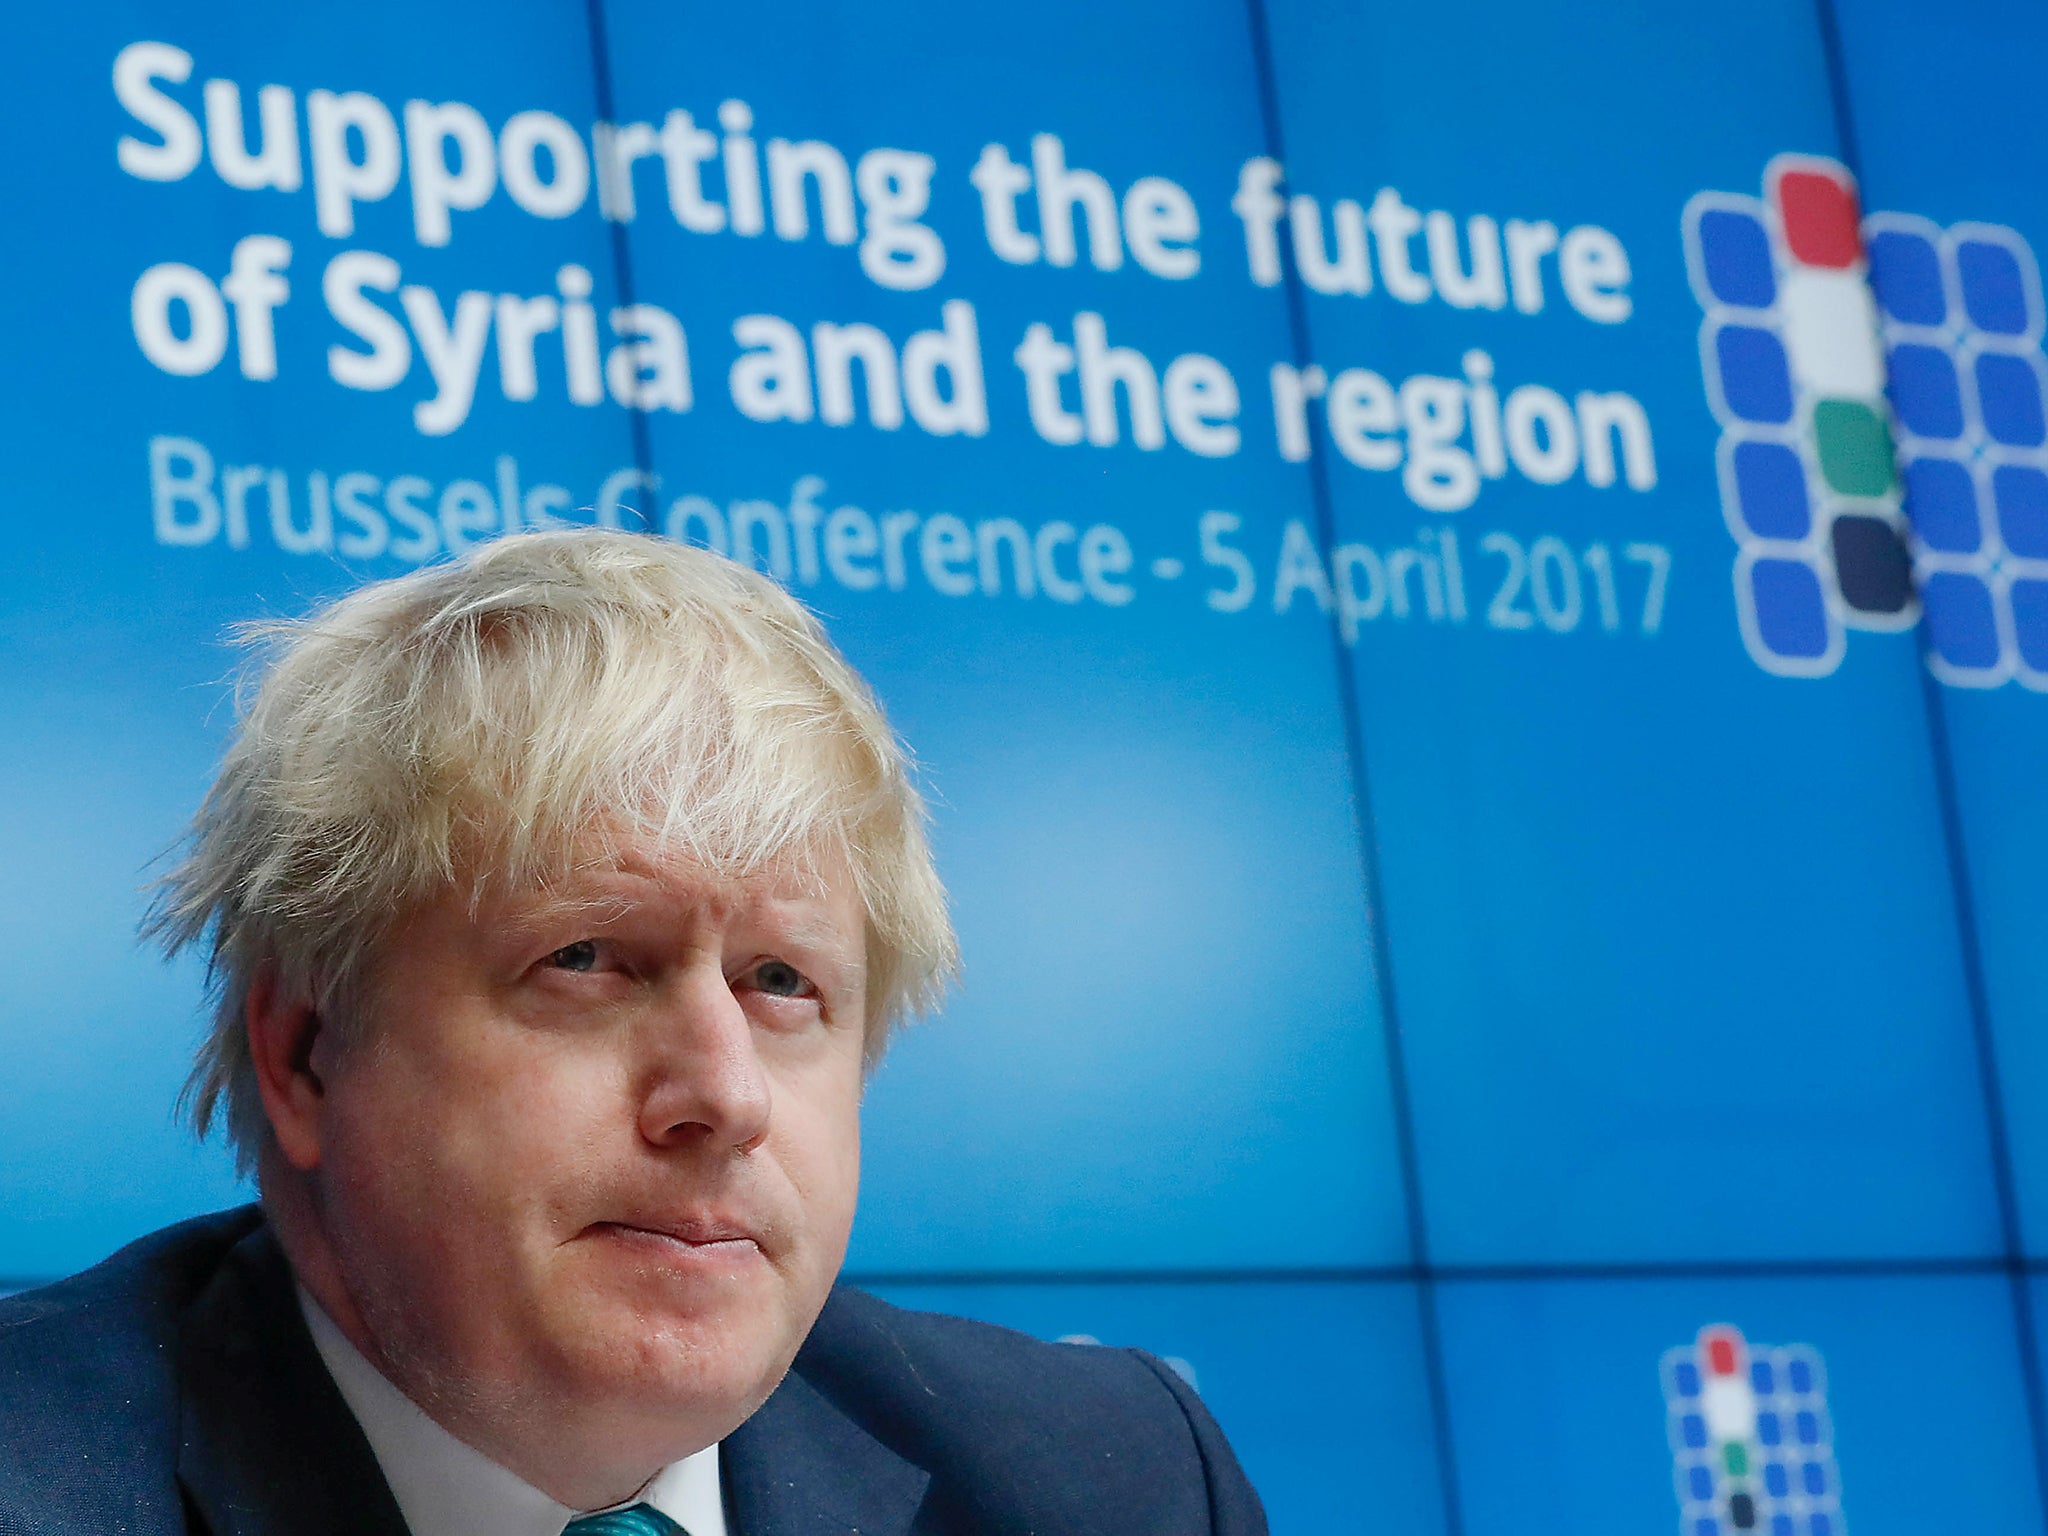 Foreign Secretary Boris Johnson at the Brussels Conference on Syria earlier this week